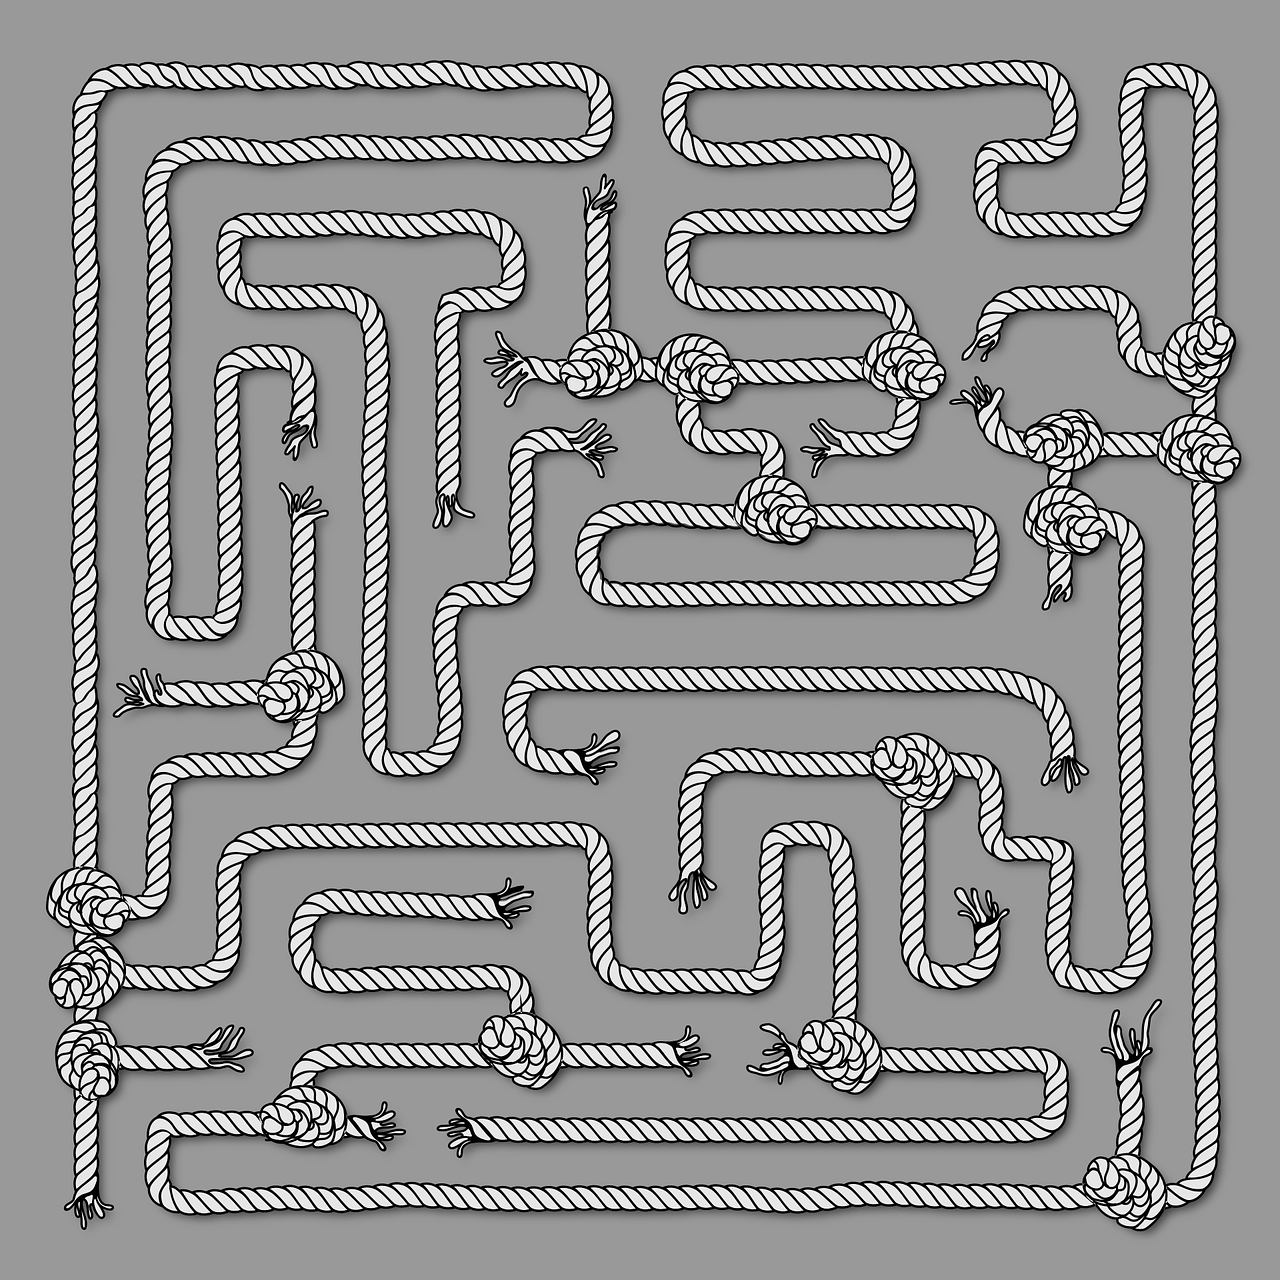 download-free-photo-of-maze-puzzle-riddle-quiz-labyrinth-from-needpix